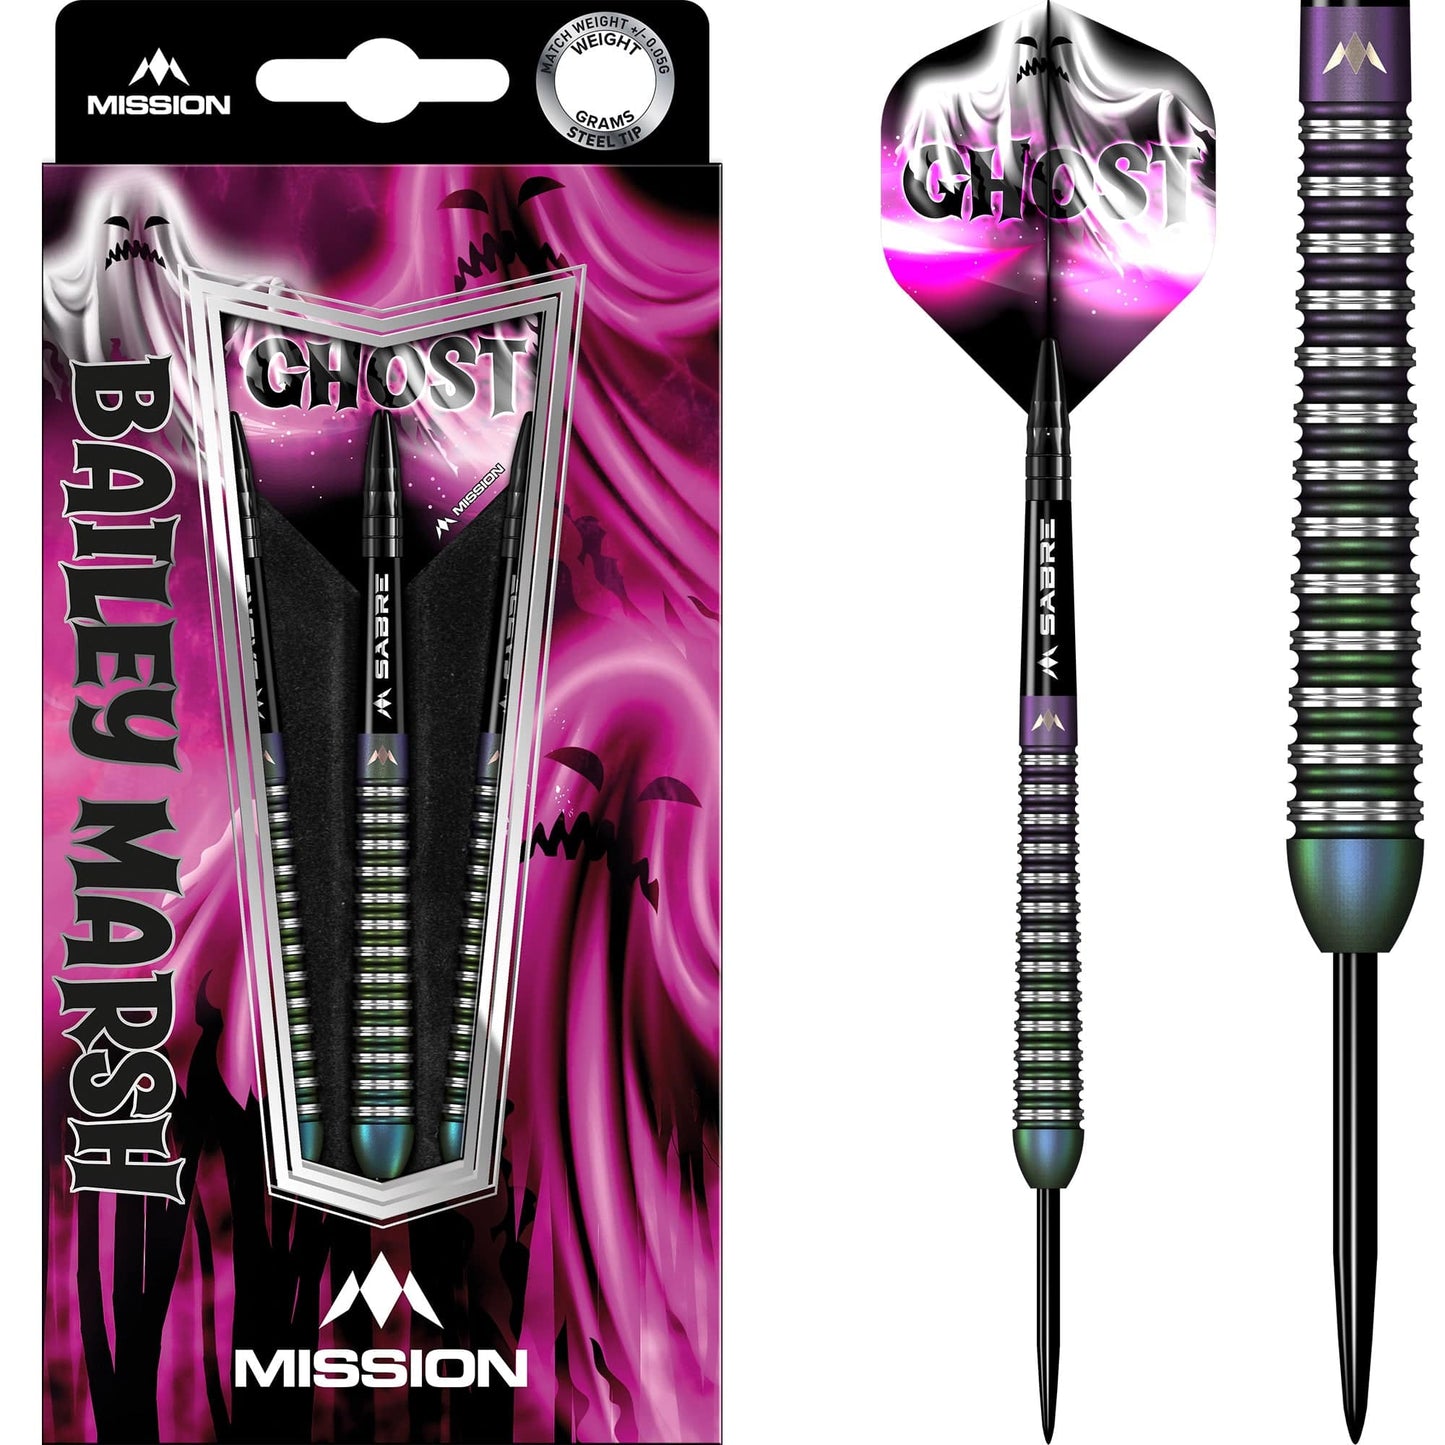 Mission Bailey Marsh Darts - Steel Tip - 90% - Coral PVD Coating - Ghost 23g